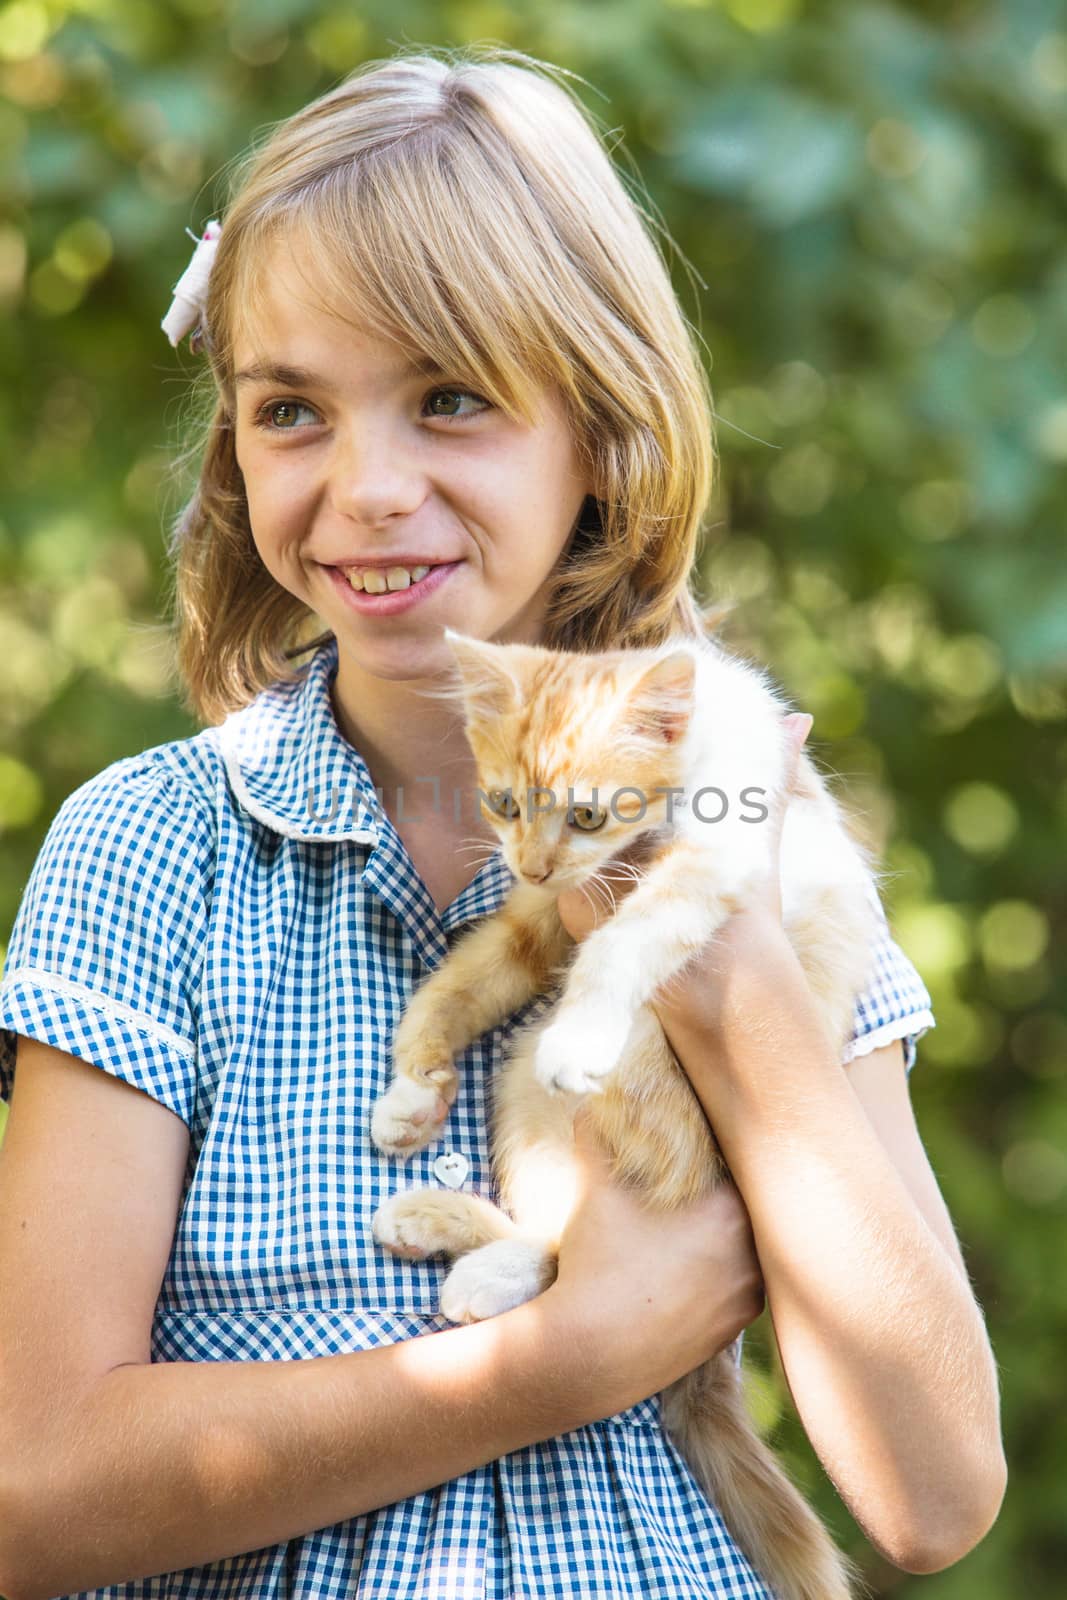 Girl play with kitten outdoor in the park